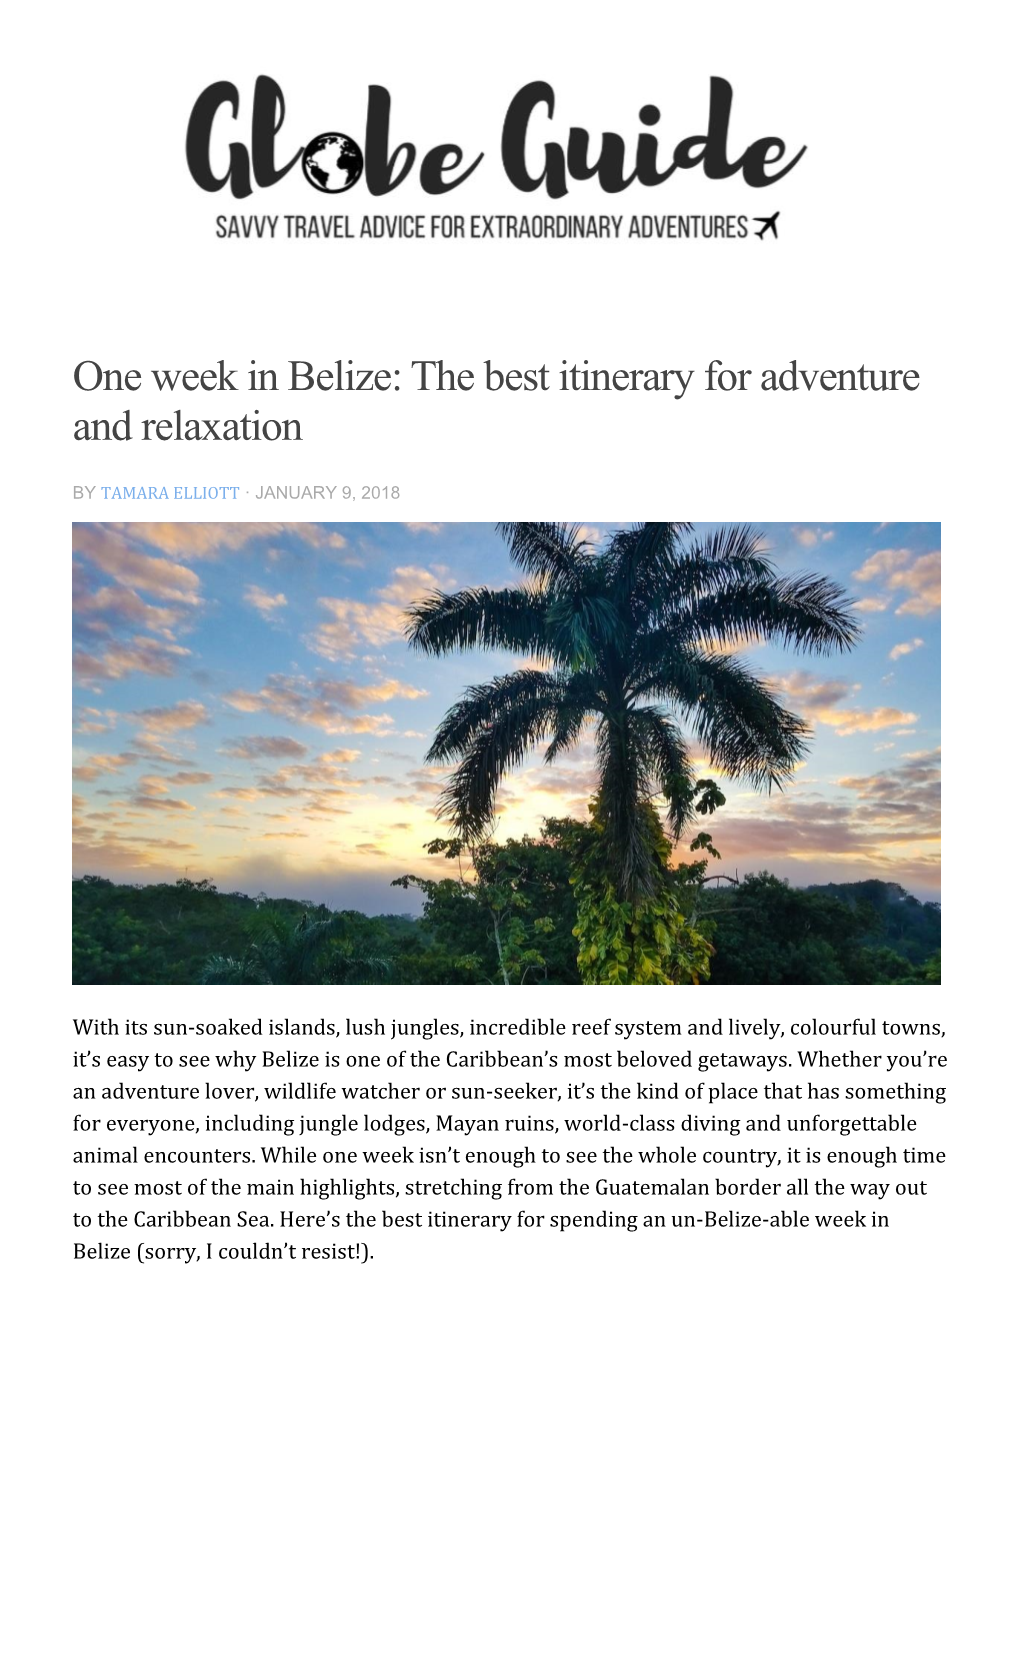 One Week in Belize: the Best Itinerary for Adventure and Relaxation